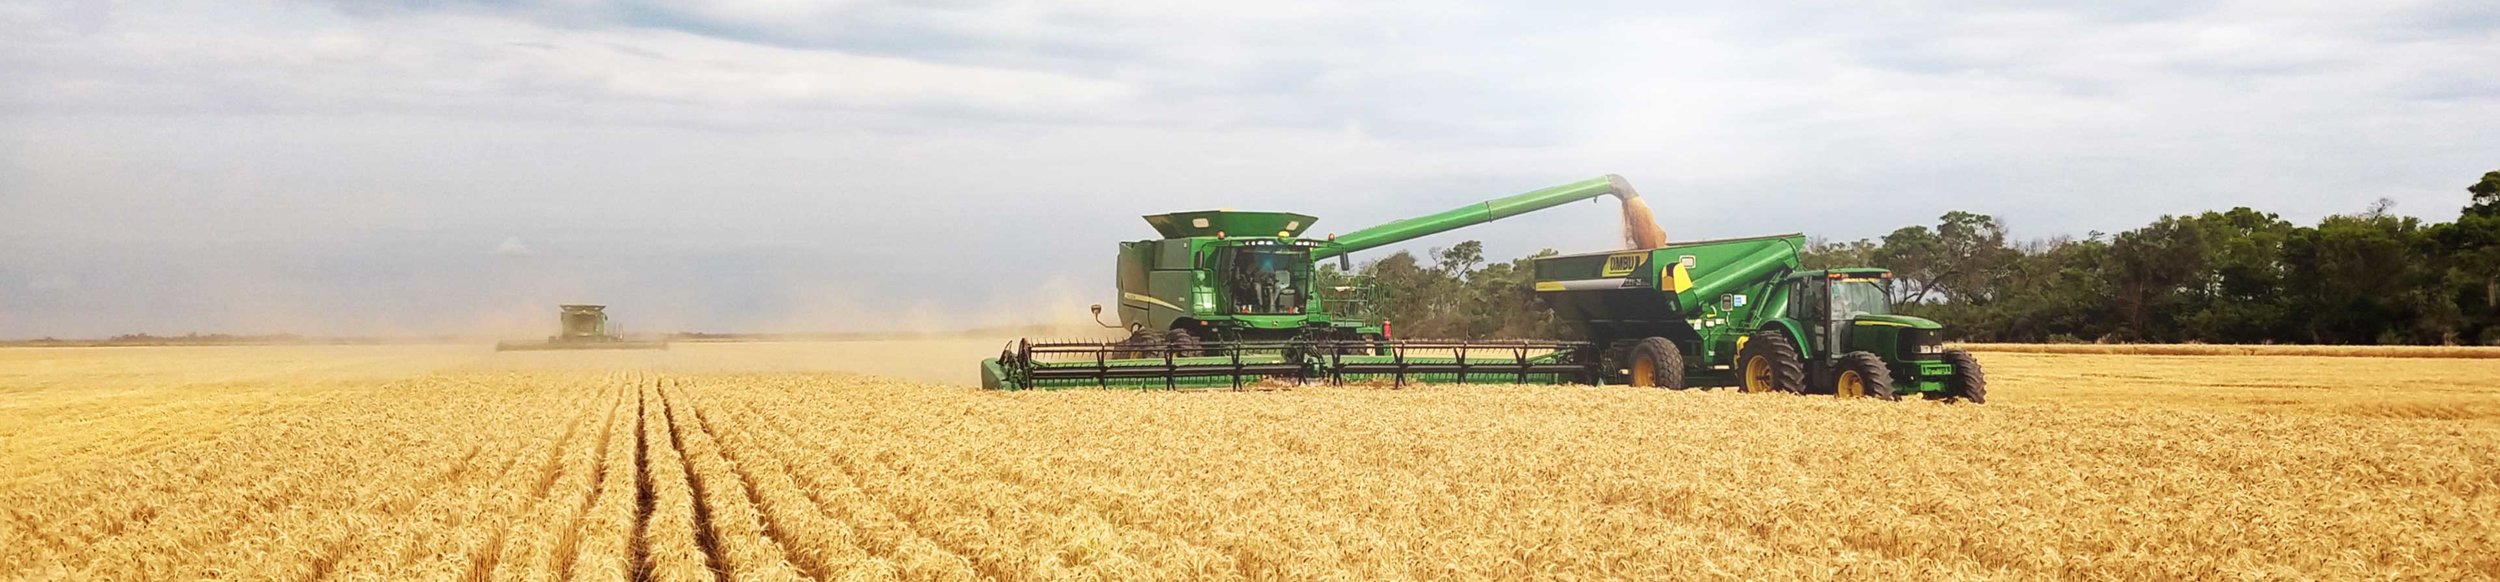 When growing, harvesting and processing commodities, Cono relies on modern technology.